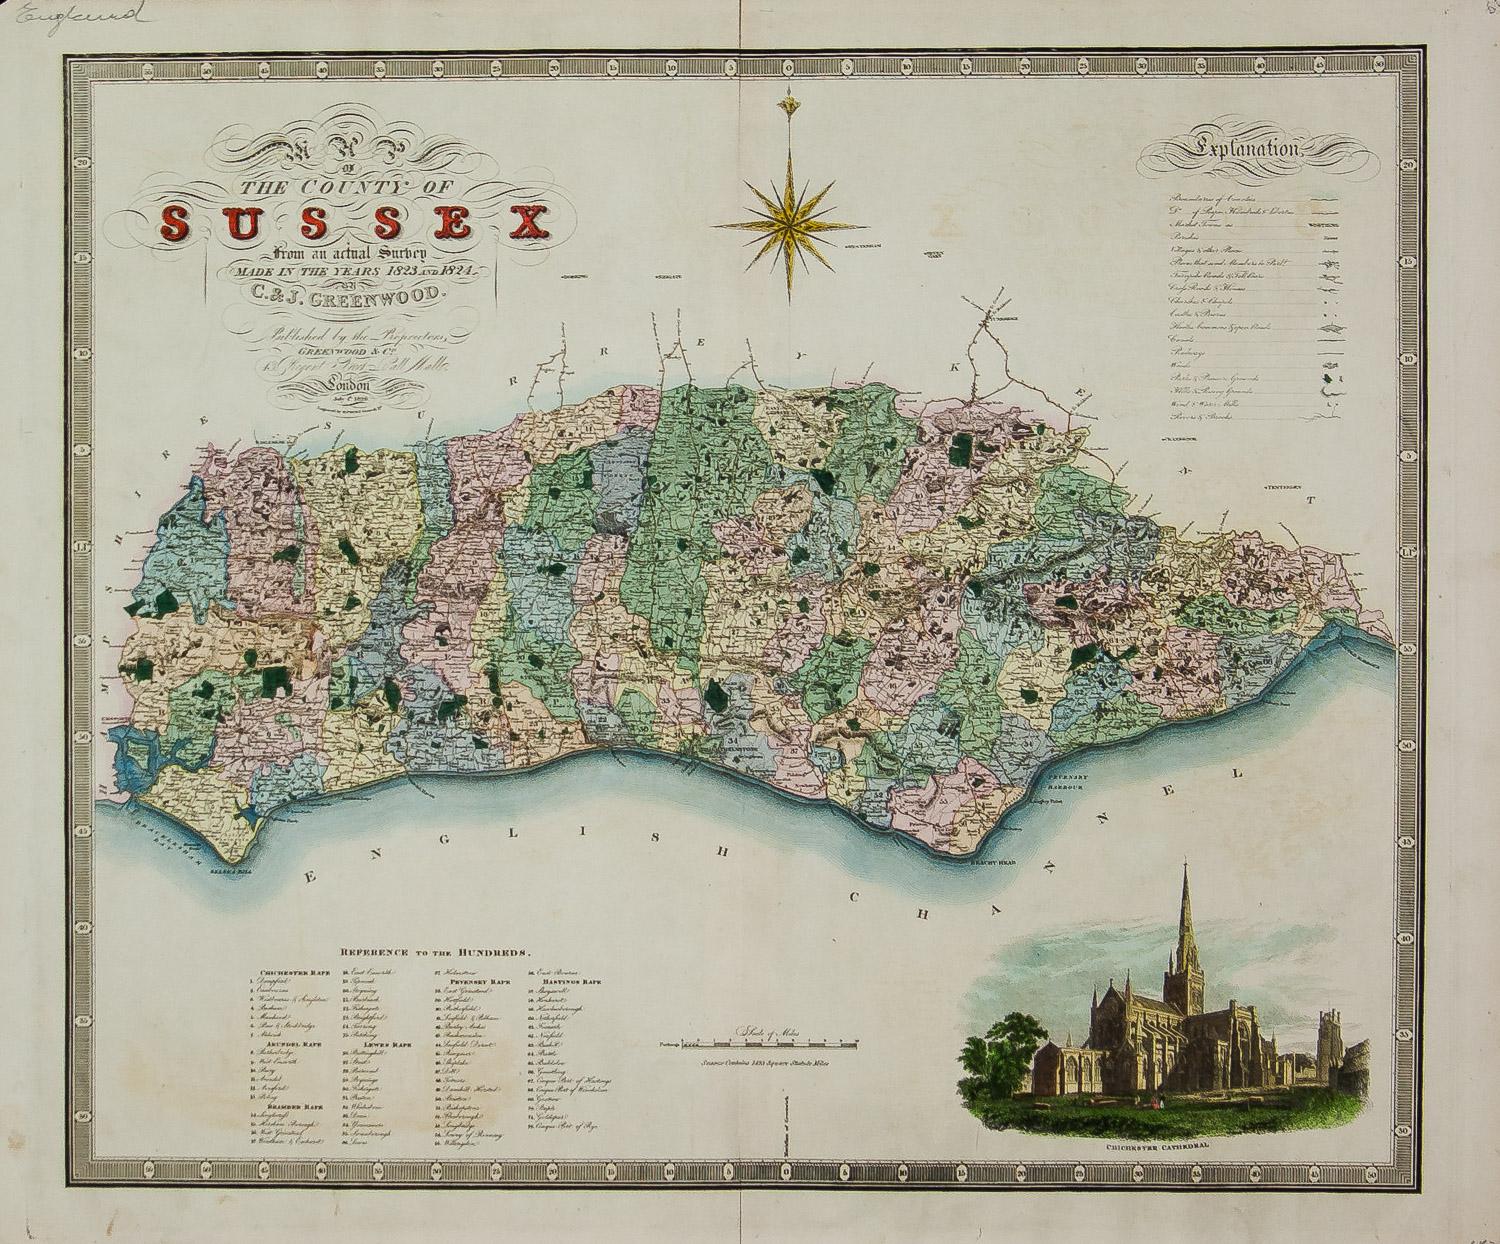 Christopher & John Greenwood Print - Map of the County of Sussex From An Actual Survey